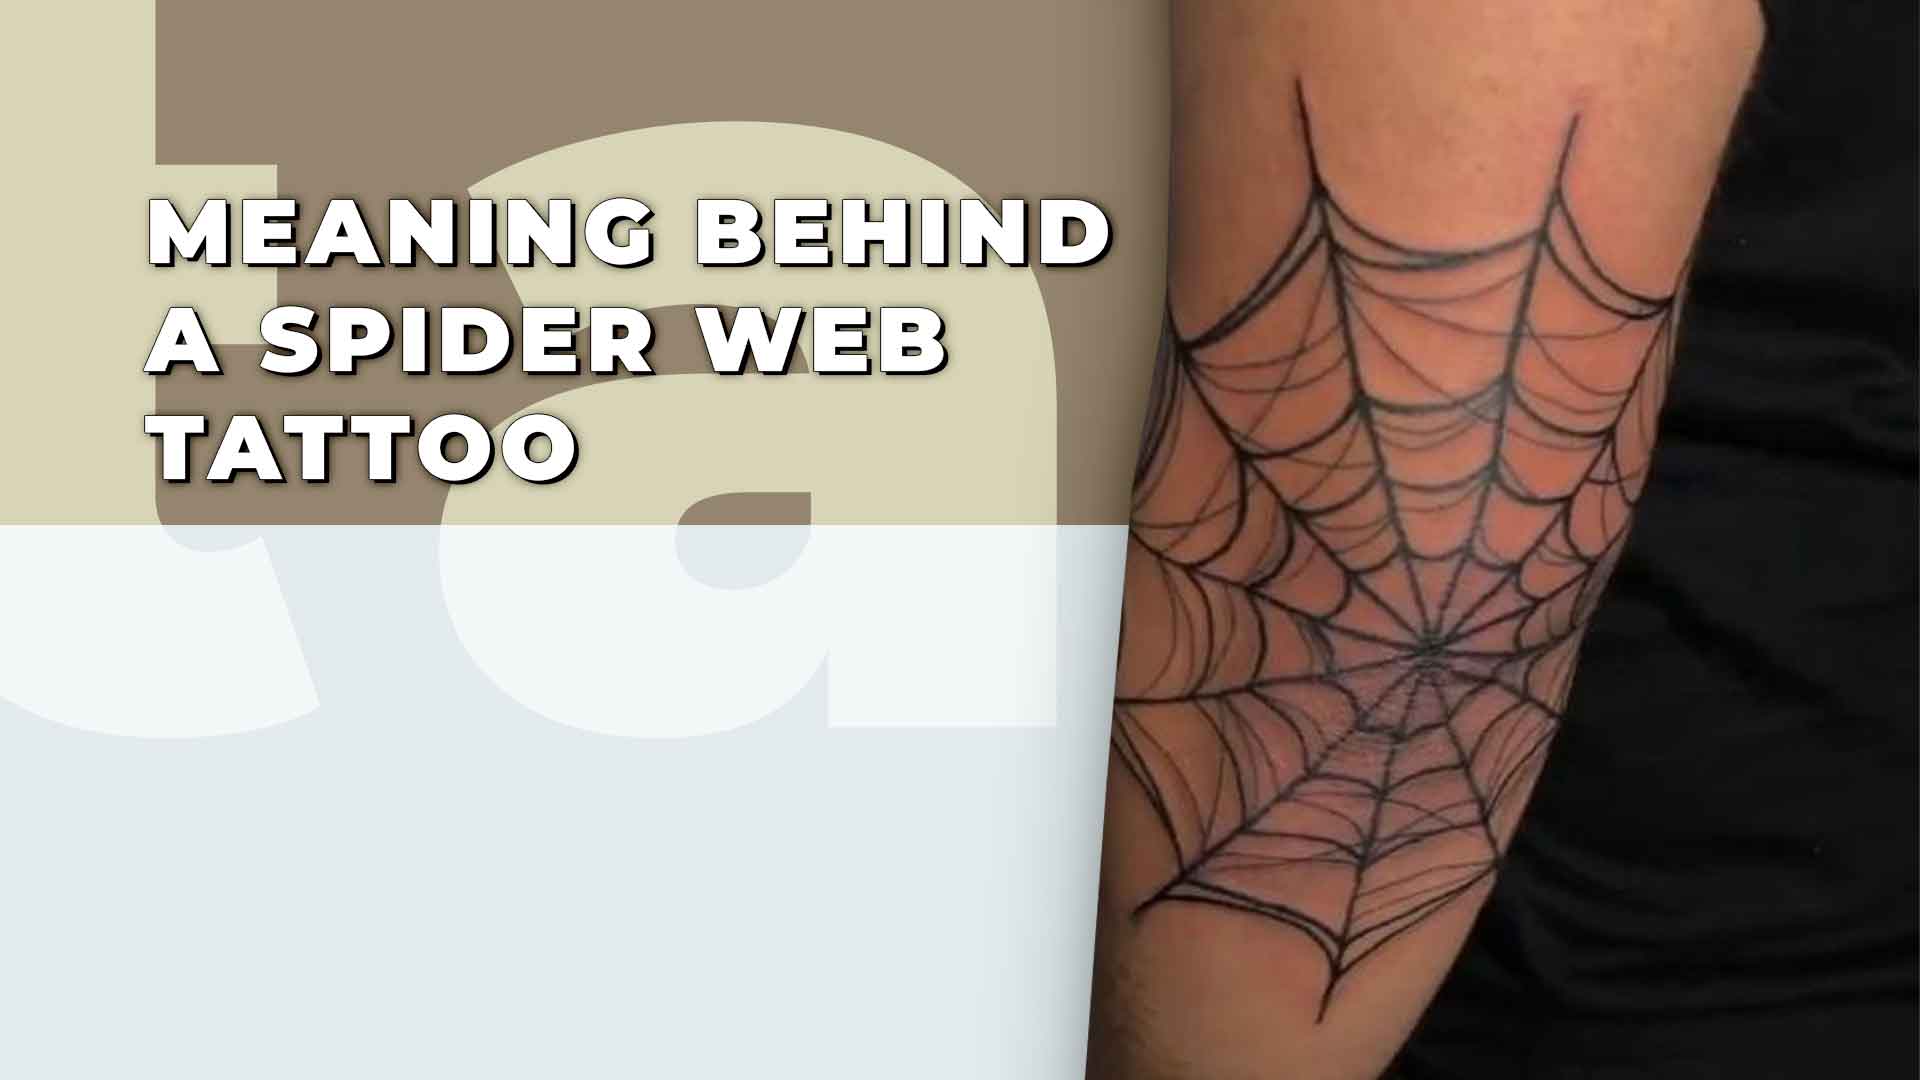 arslan jan recommends spiderweb tattoo on elbow pic